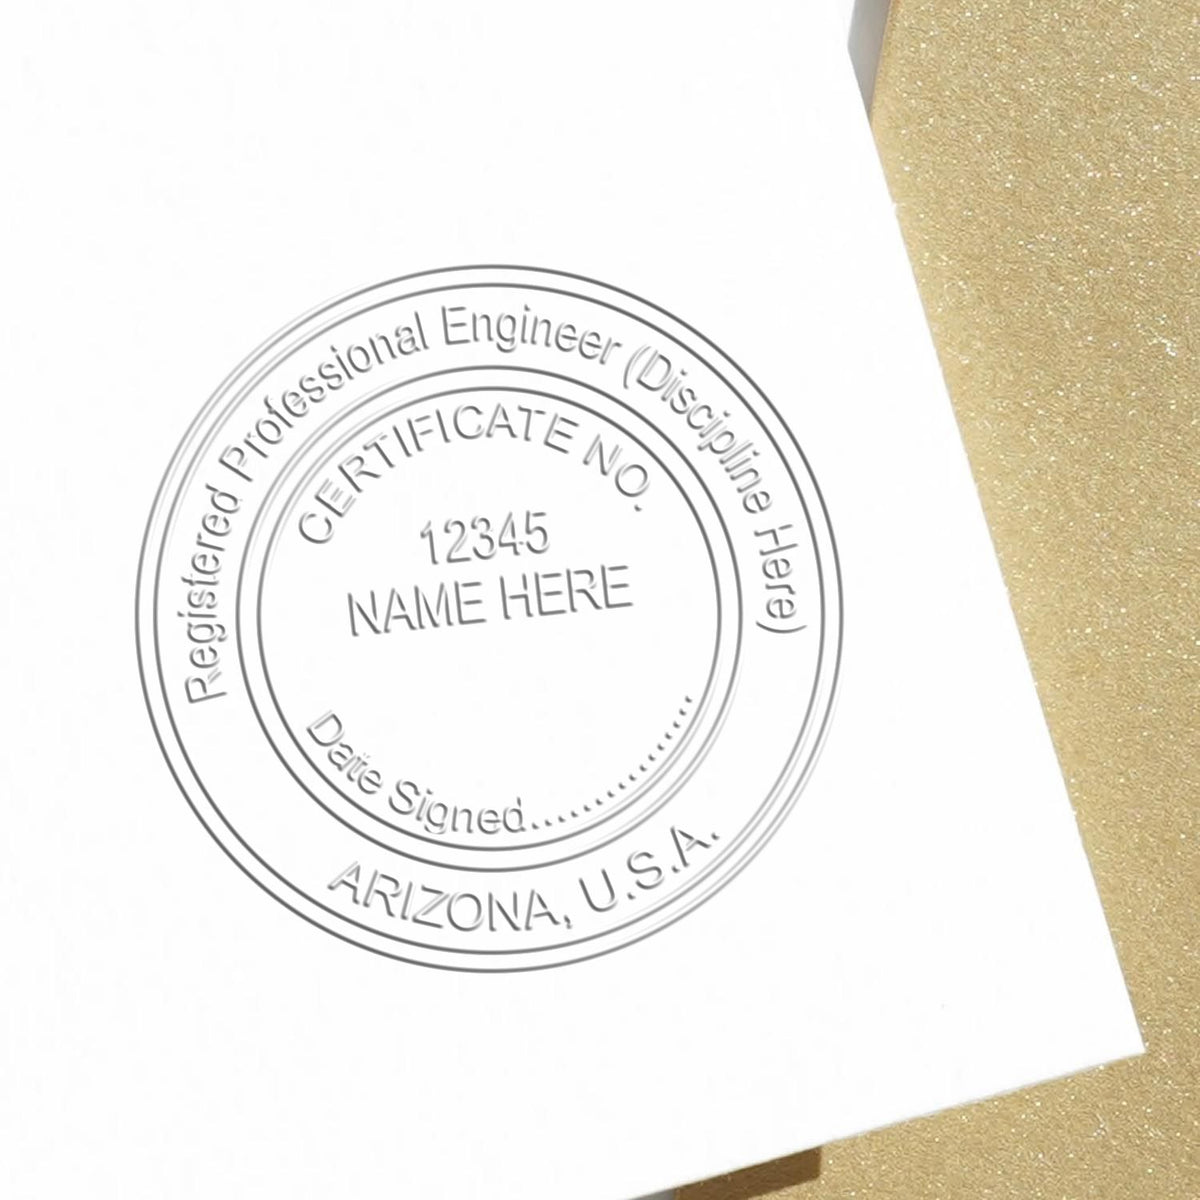 The Heavy Duty Cast Iron Arizona Engineer Seal Embosser stamp impression comes to life with a crisp, detailed photo on paper - showcasing true professional quality.